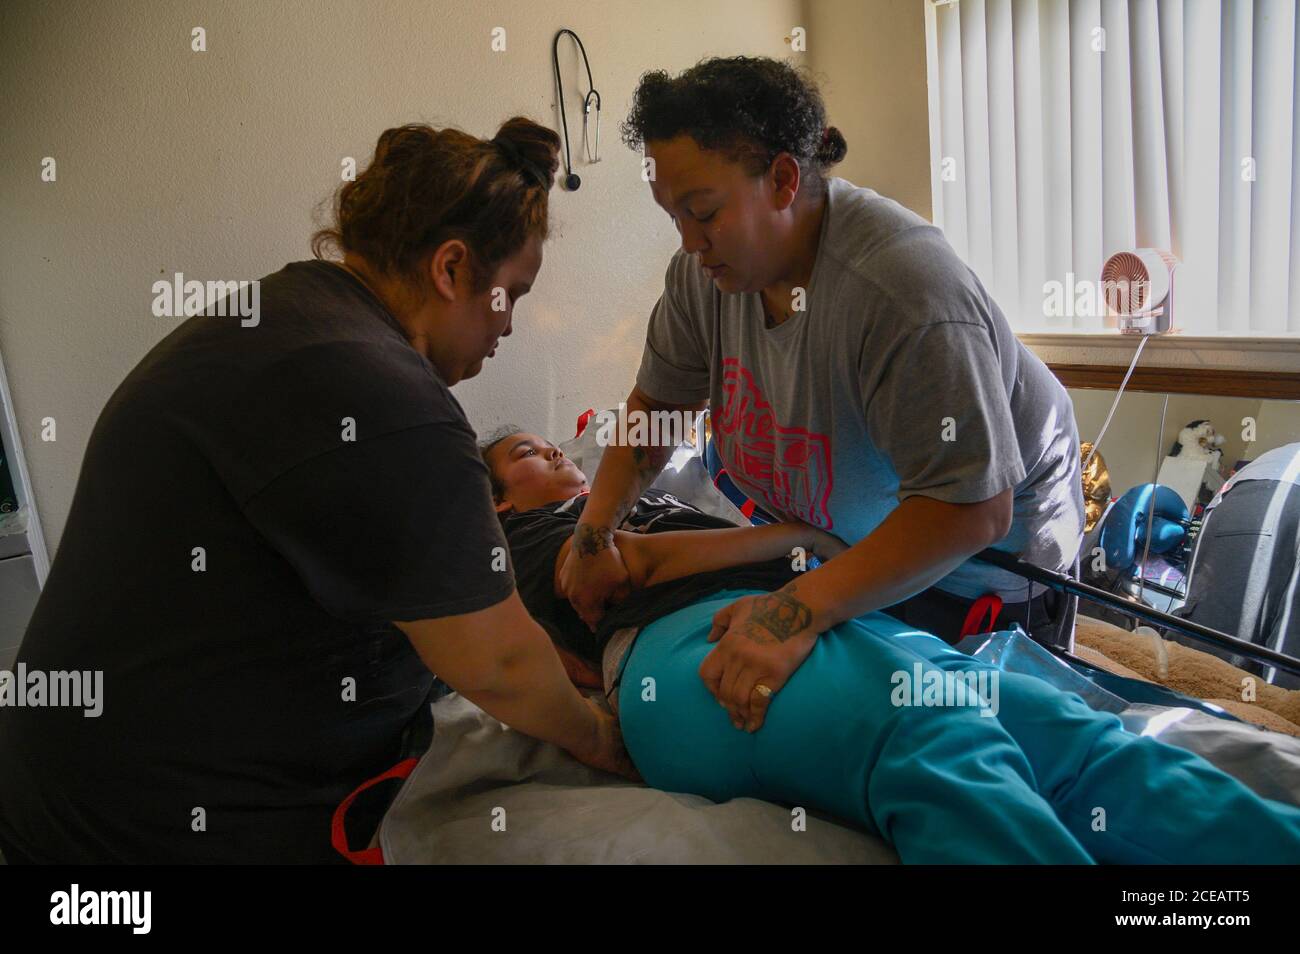 Sacramento, California, USA. 10th Feb, 2019. Felicia Brent-Velasquez is dressed by her mom Felicia Clark, right, and sister Paulina, left, who she depends on since being paralyzed from the neck down on Feb. 10, 2020. 'It's a lot of day to day care and I didn't get trained for this, nobody said hey Felicia you should go to schooling for nursing cause you might need it one day,'' said Clark who manages all the care for her quadriplegic daughter. Credit: Renée C. Byer/ZUMA Wire/Alamy Live News Stock Photo